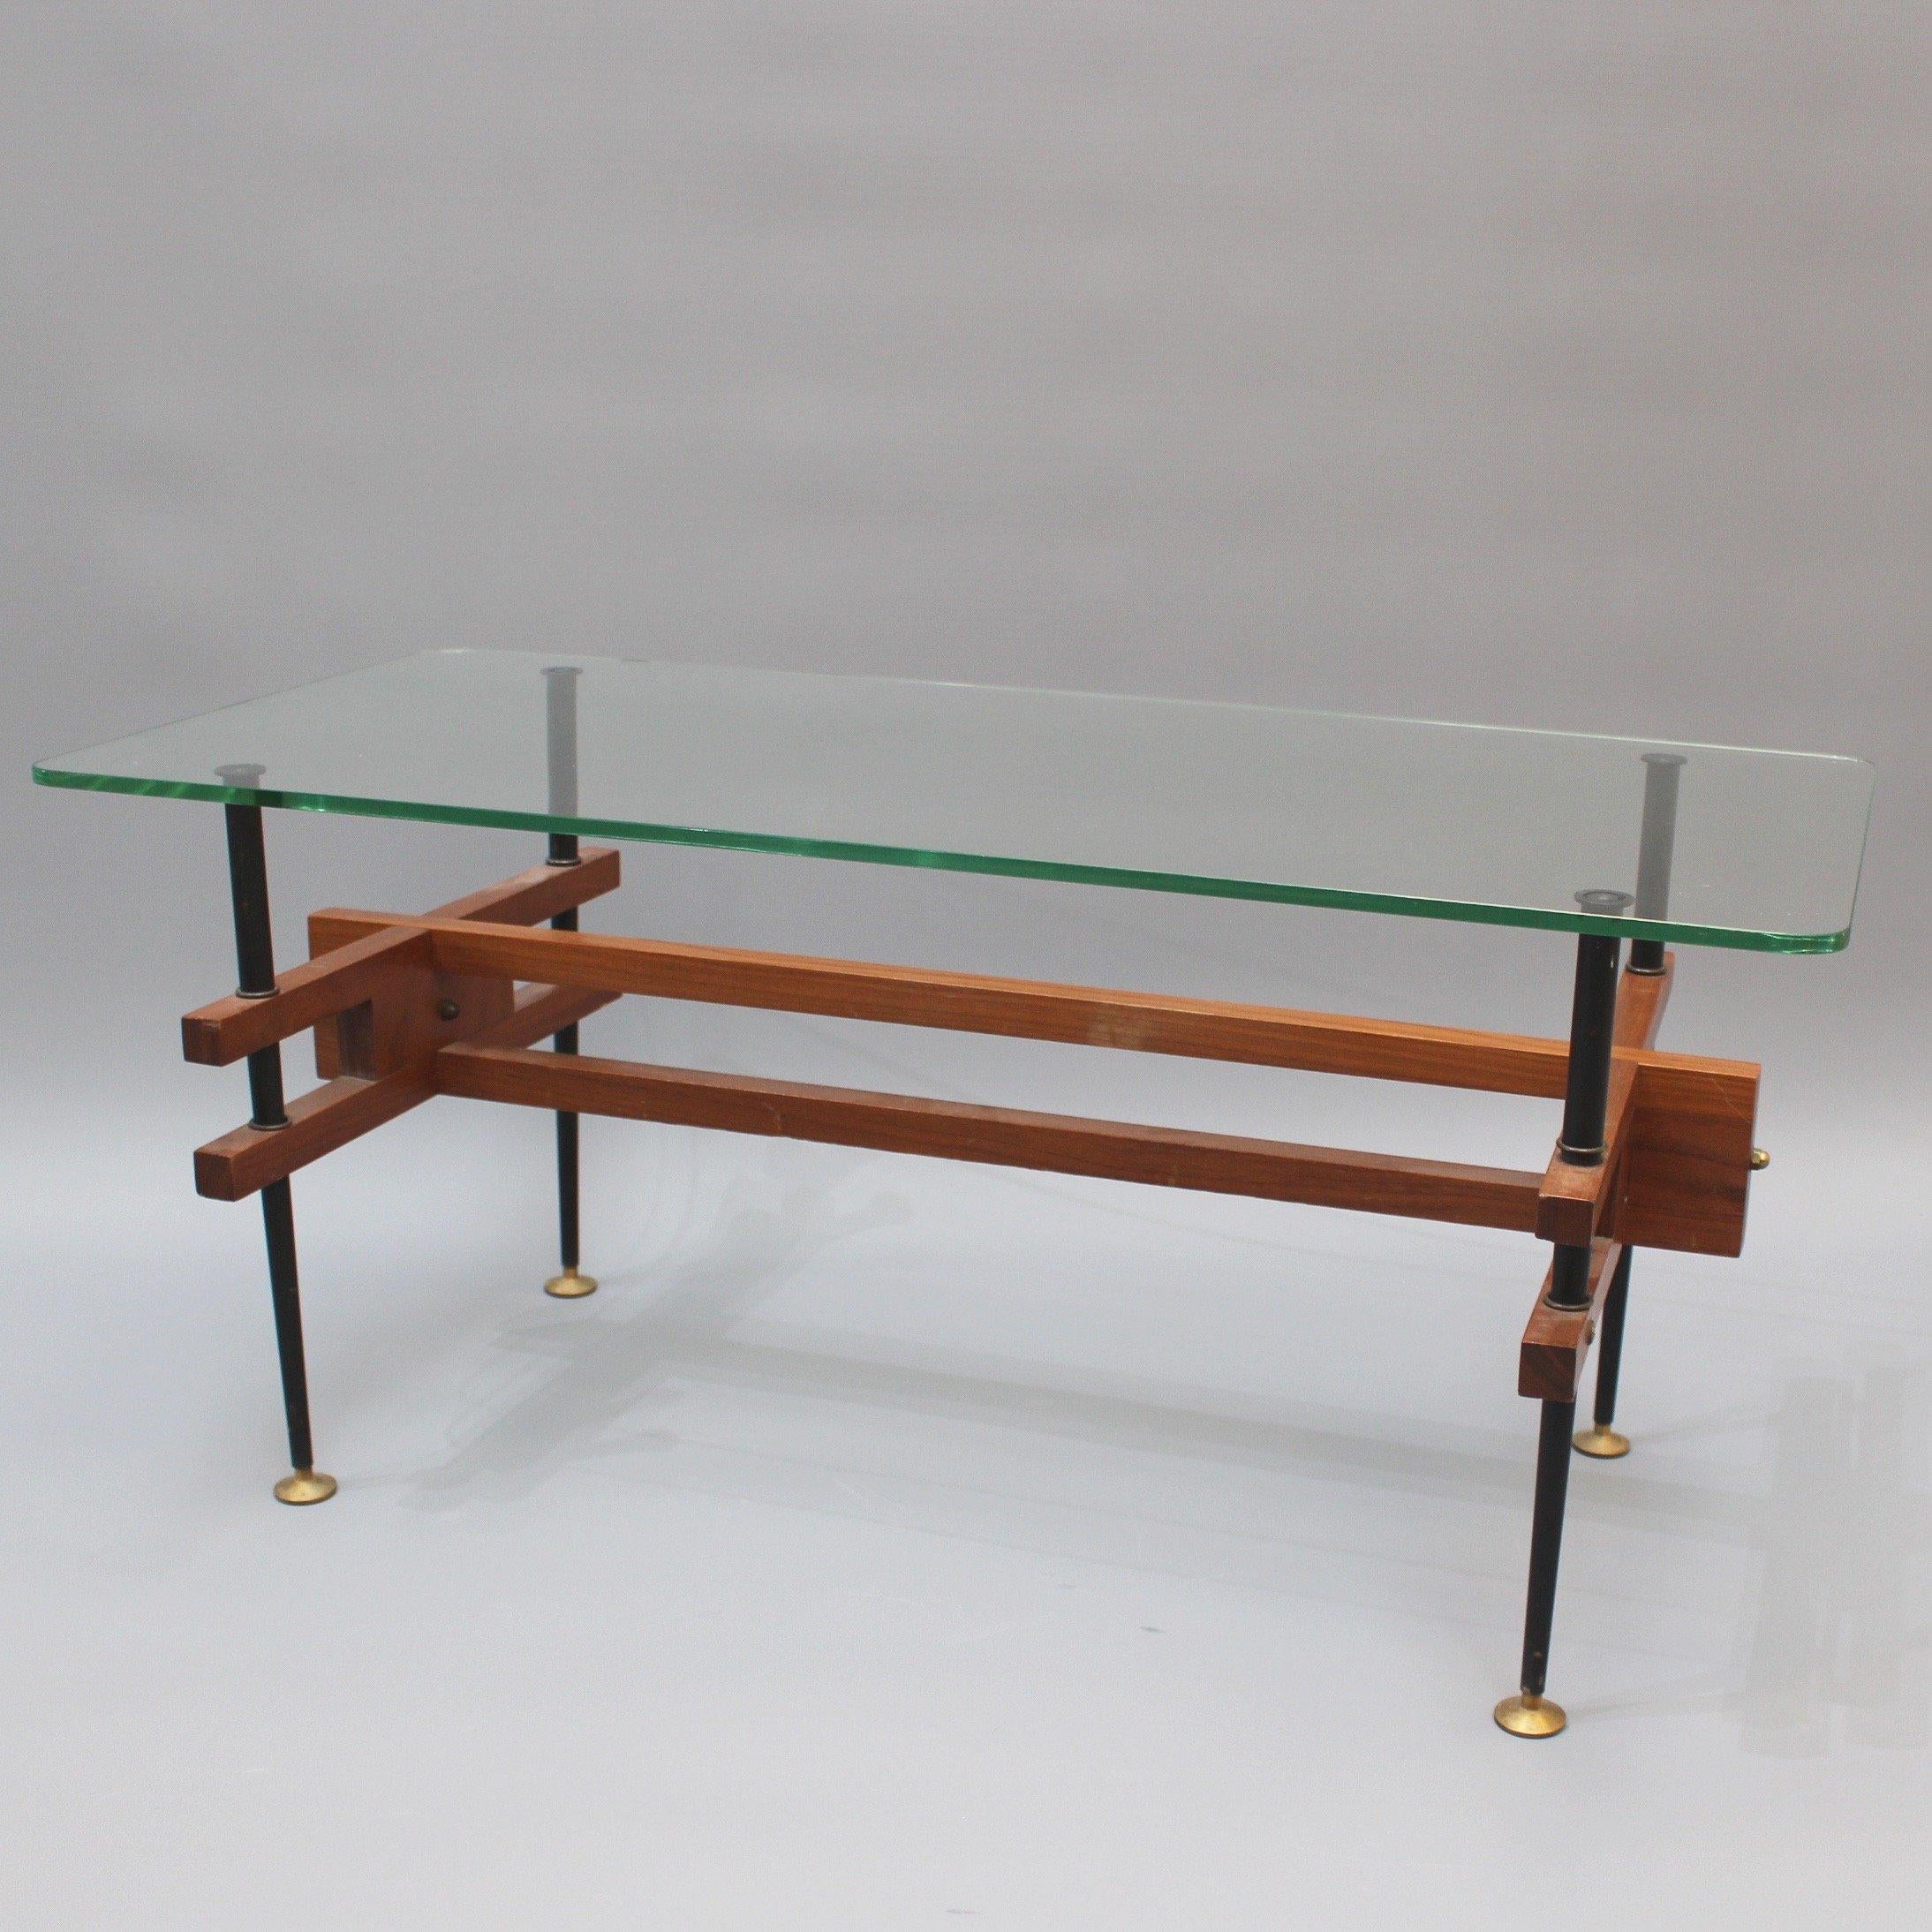 Mid-century modern Italian coffee table (circa 1960s). This is a delightful, light weight modern table with removable glass top and wooden frame. The wooden frame consists of an elongated piece and two H-frame cross-supports which attach to the